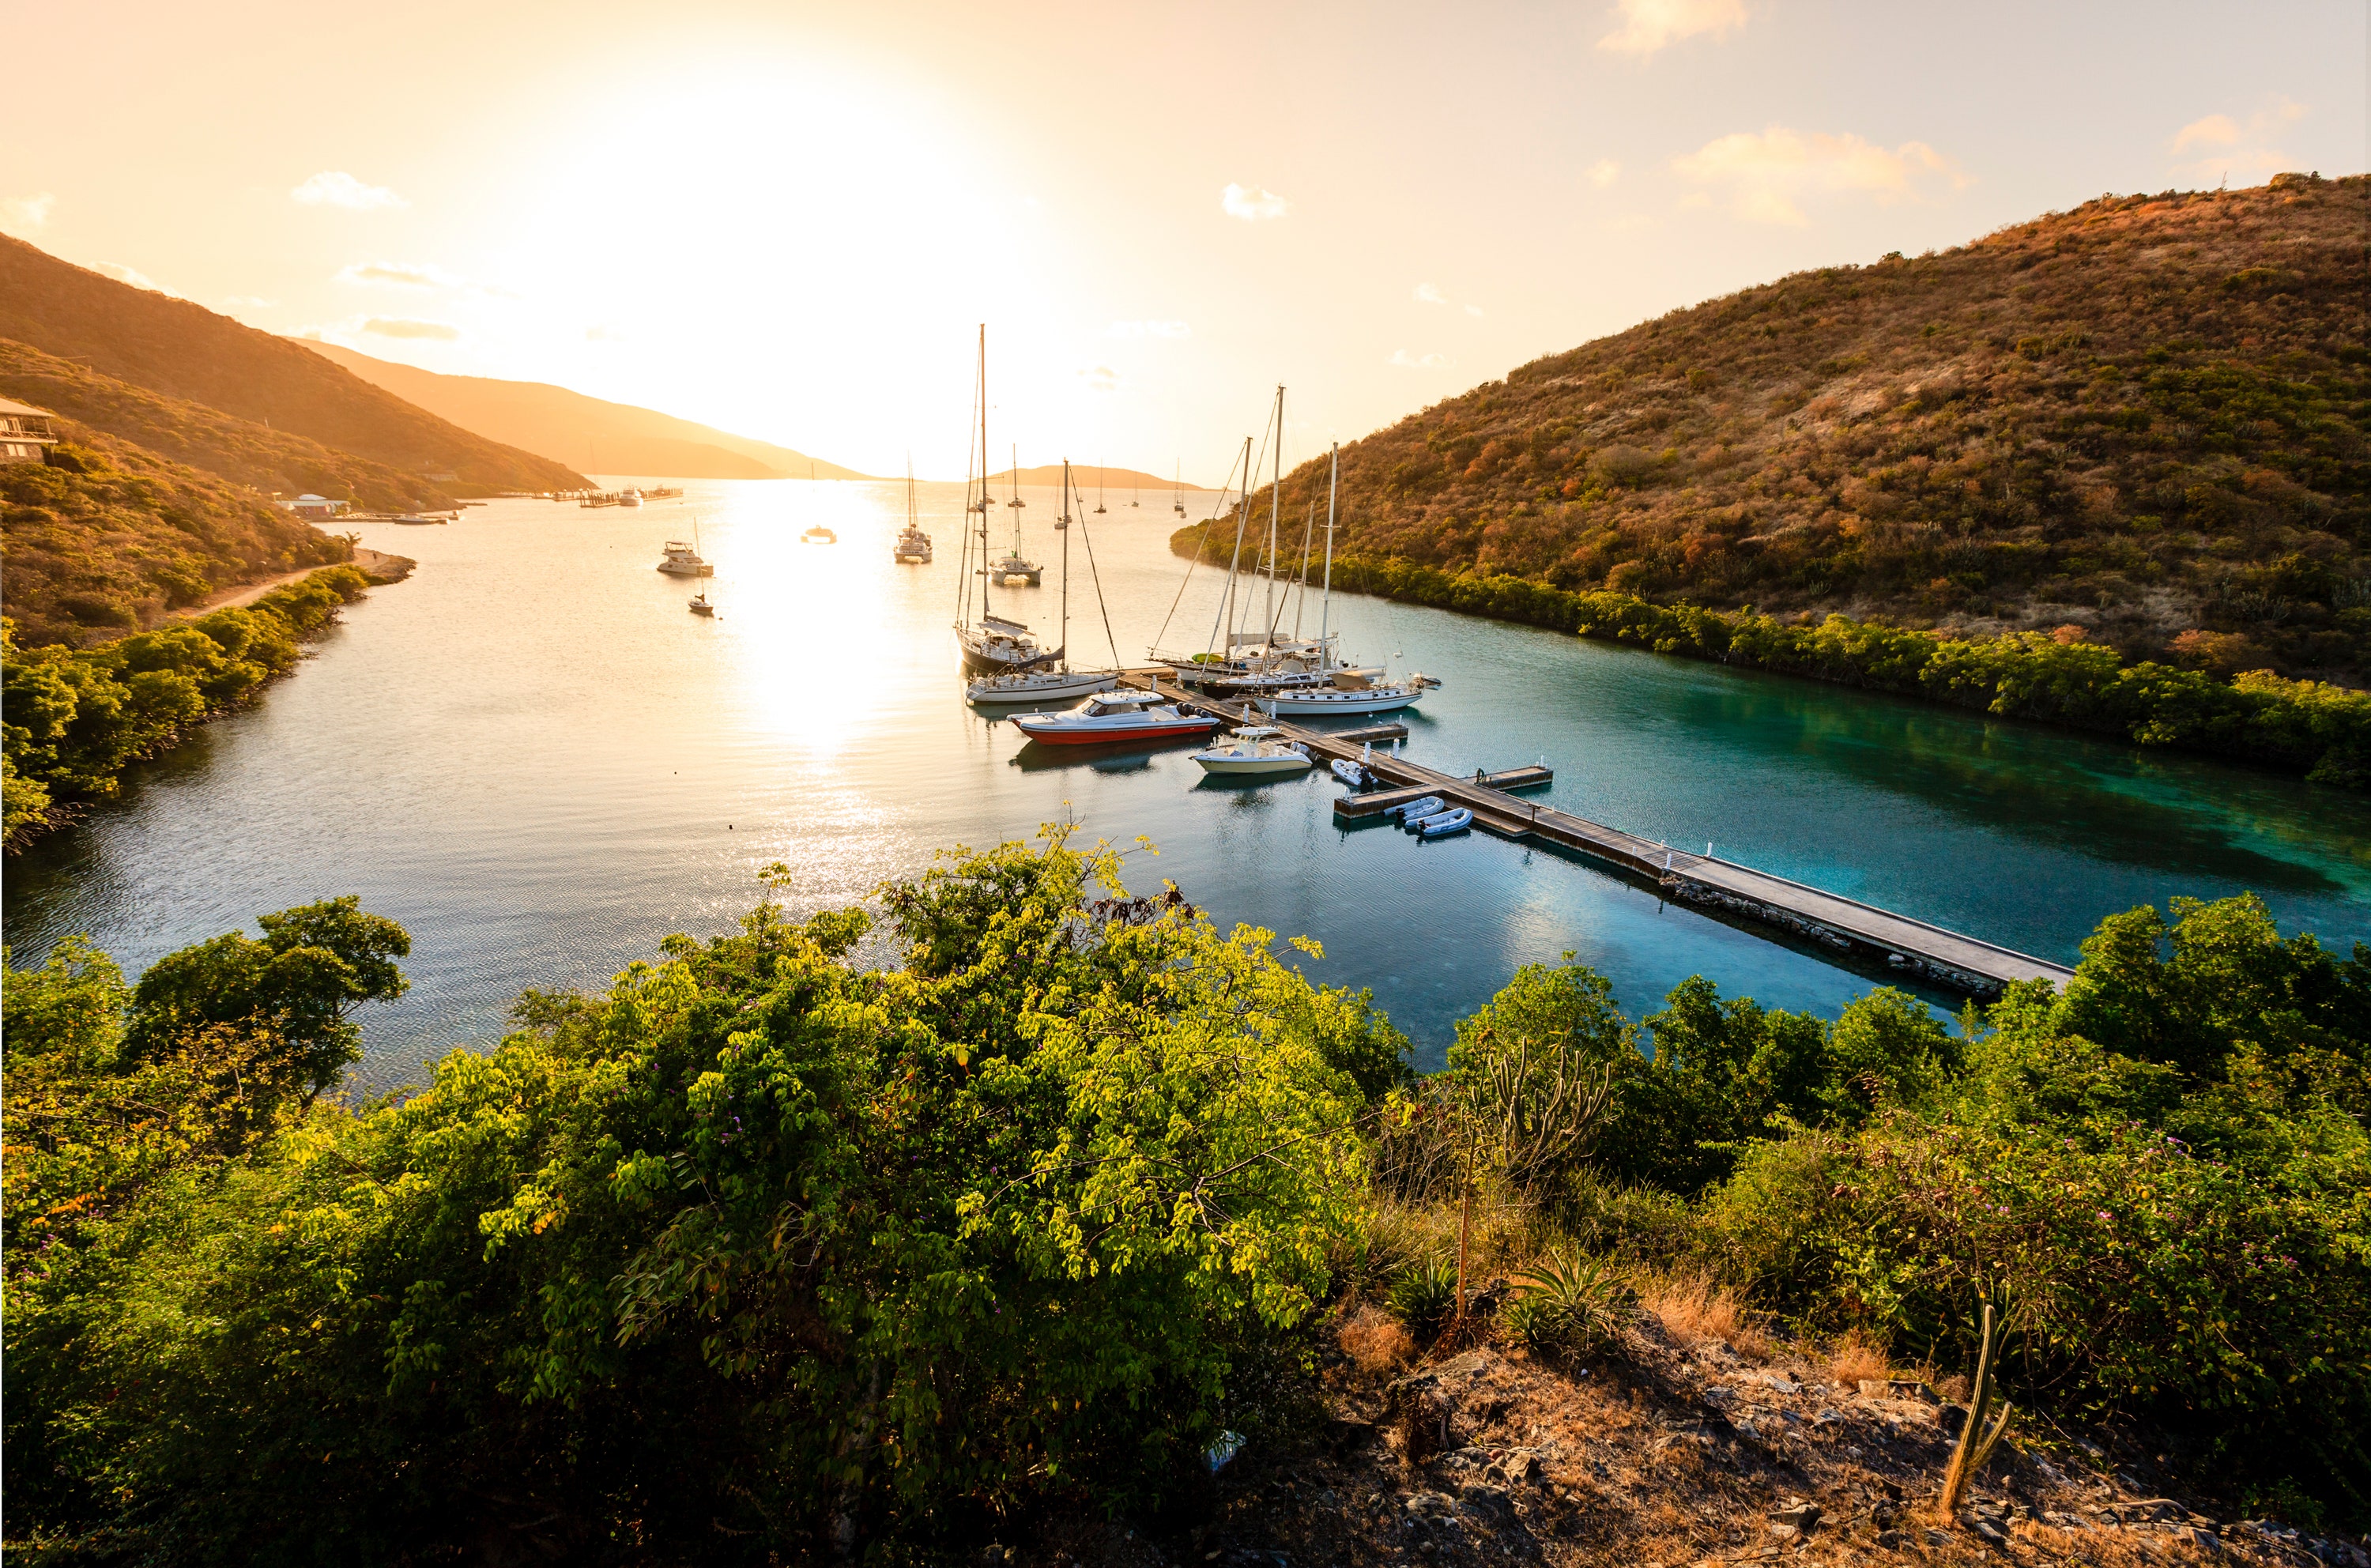 <p>The <a href="https://www.cntraveler.com/story/where-to-eat-stay-and-play-in-the-british-virgin-islands?mbid=synd_msn_rss&utm_source=msn&utm_medium=syndication">British Virgin Islands</a> and <a href="https://www.cntraveler.com/sponsored/story/americans-can-leave-their-passports-behind-to-reconnect-with-this-caribbean-paradise?mbid=synd_msn_rss&utm_source=msn&utm_medium=syndication">US Virgin Islands</a> are some of the best training grounds for novice sailors “because of their line-of-sight sailing, predictable wind, and sailor-friendly destinations,” Quezada says. “In the BVI, you can learn to sail and have a beach vacation simultaneously.”</p> <p>If you’re looking to get your bareboat license, there are several ASA-certified sailing schools in the BVI and US Virgin Islands. <a href="https://cna.st/affiliate-link/3qWb9ebJmvAykTPuCAMuQmJCtNYHeP2tSqKHGQsjySq9oFNgP2ZxWtPwMfQ1ybGrtkKCtJzV7opXbFBSY5mDCFjrp52g2NQpAj9jsLpxDsf5377Szsdu1s1PN2BMK689VmZDm32YeqrJv" rel="sponsored">Offshore Sailing School</a>, one of the world's preeminent sailing institutions, offers fast track courses for all levels of sailing. Alternatively, charter a captained catamaran, one of the most popular ways to explore the Caribbean.</p><p>Sign up to receive the latest news, expert tips, and inspiration on all things travel</p><a href="https://www.cntraveler.com/newsletter/the-daily?sourceCode=msnsend">Inspire Me</a>